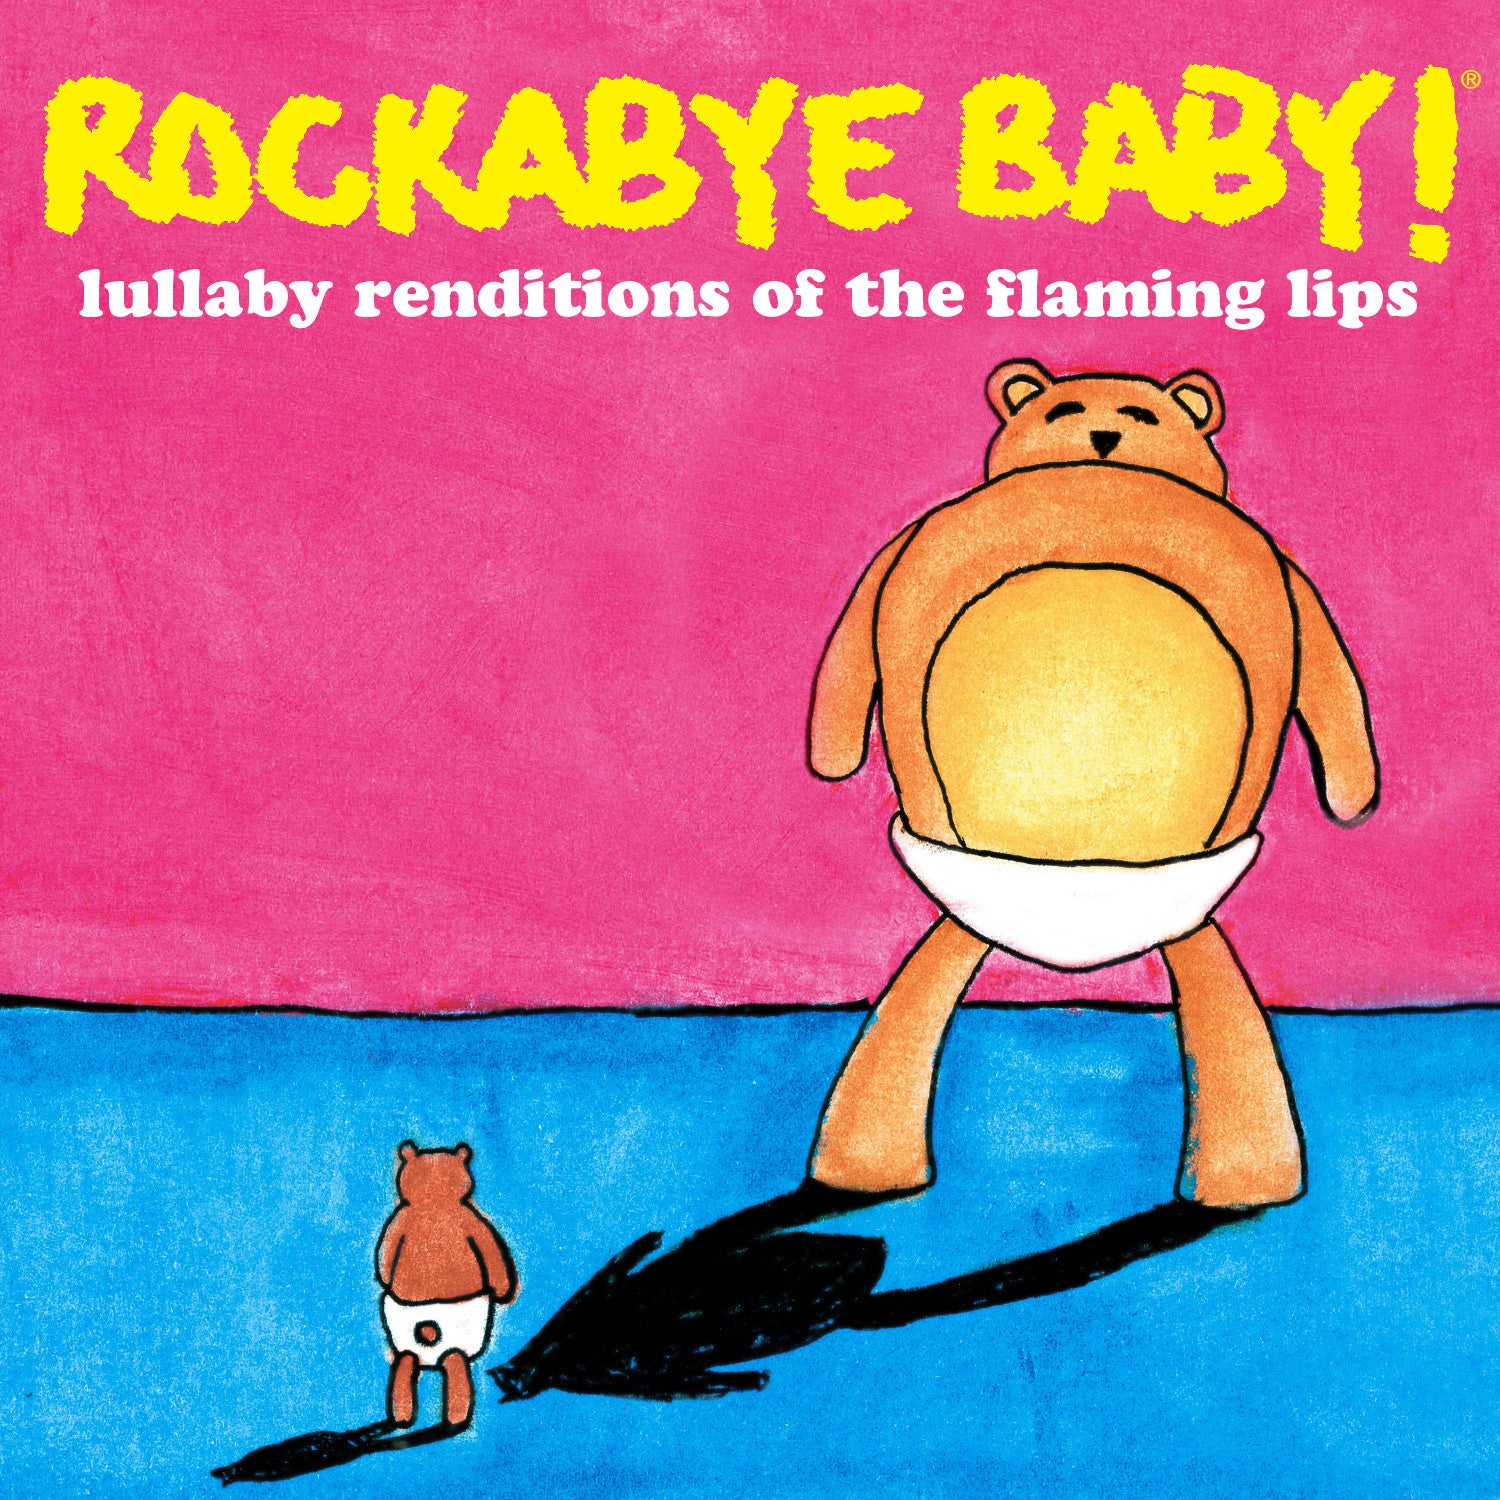 rockabye baby lullaby renditions flaming lips